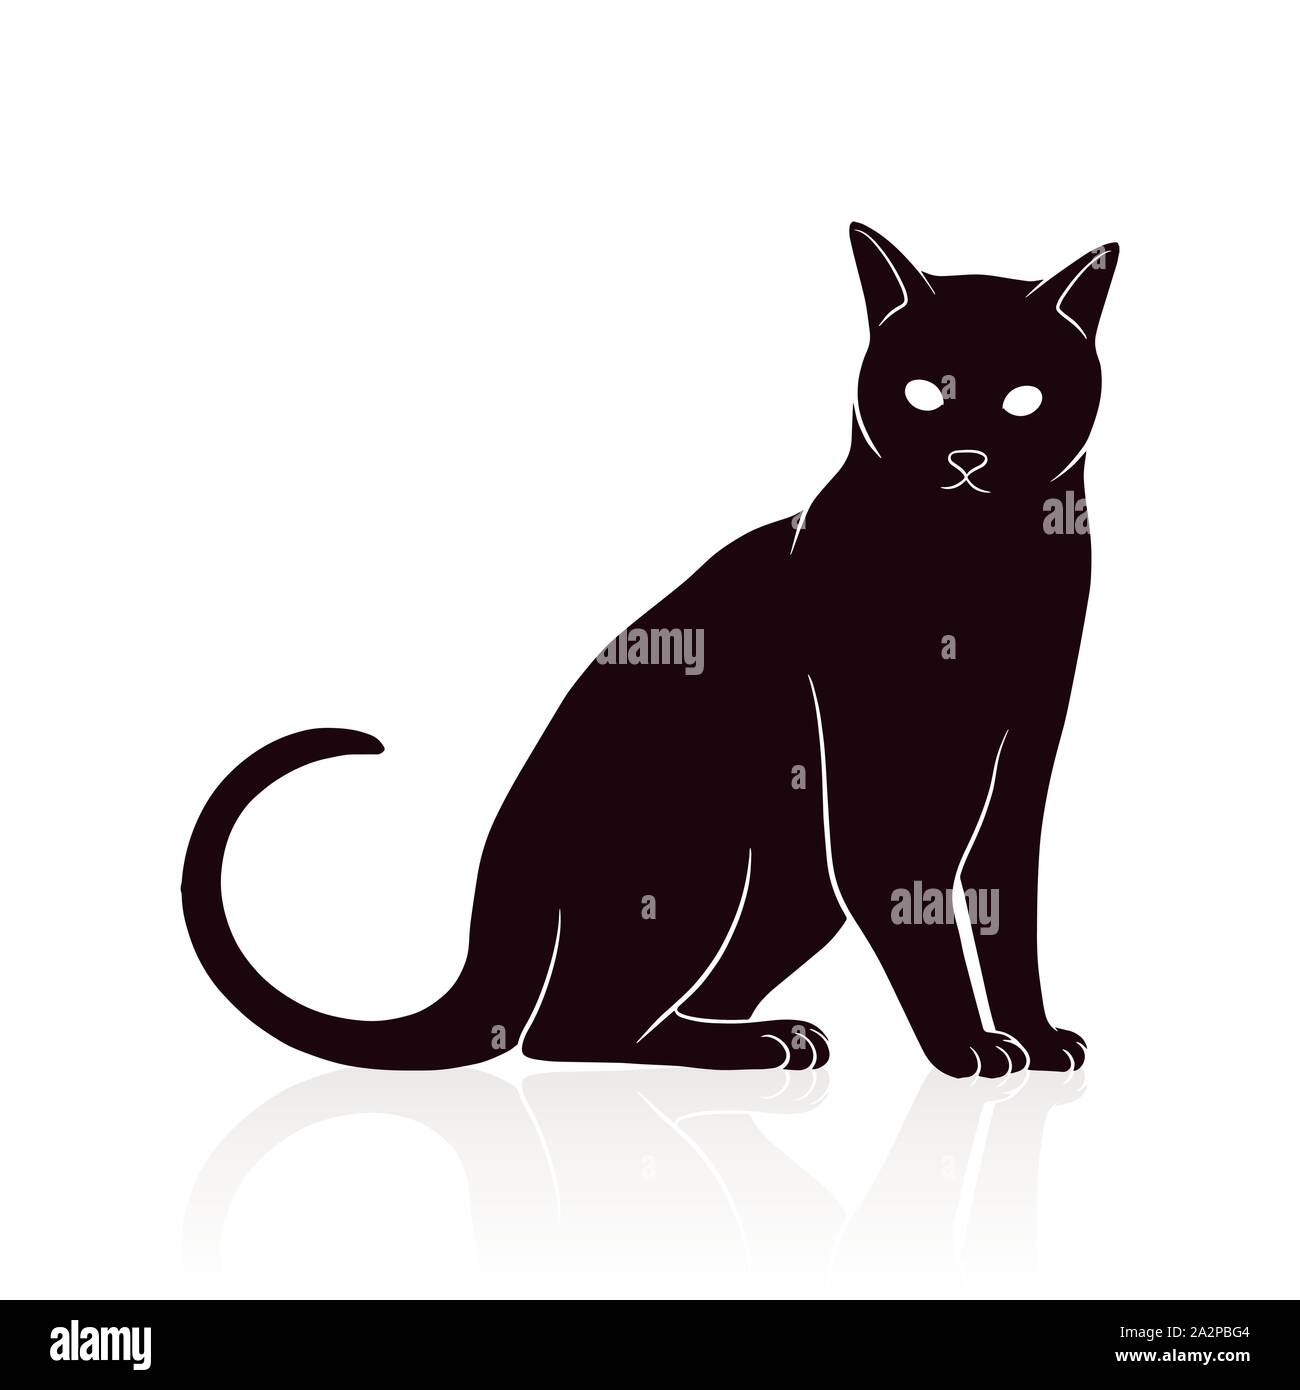 cat silhouette vector illustration isolated on white background Stock Vector